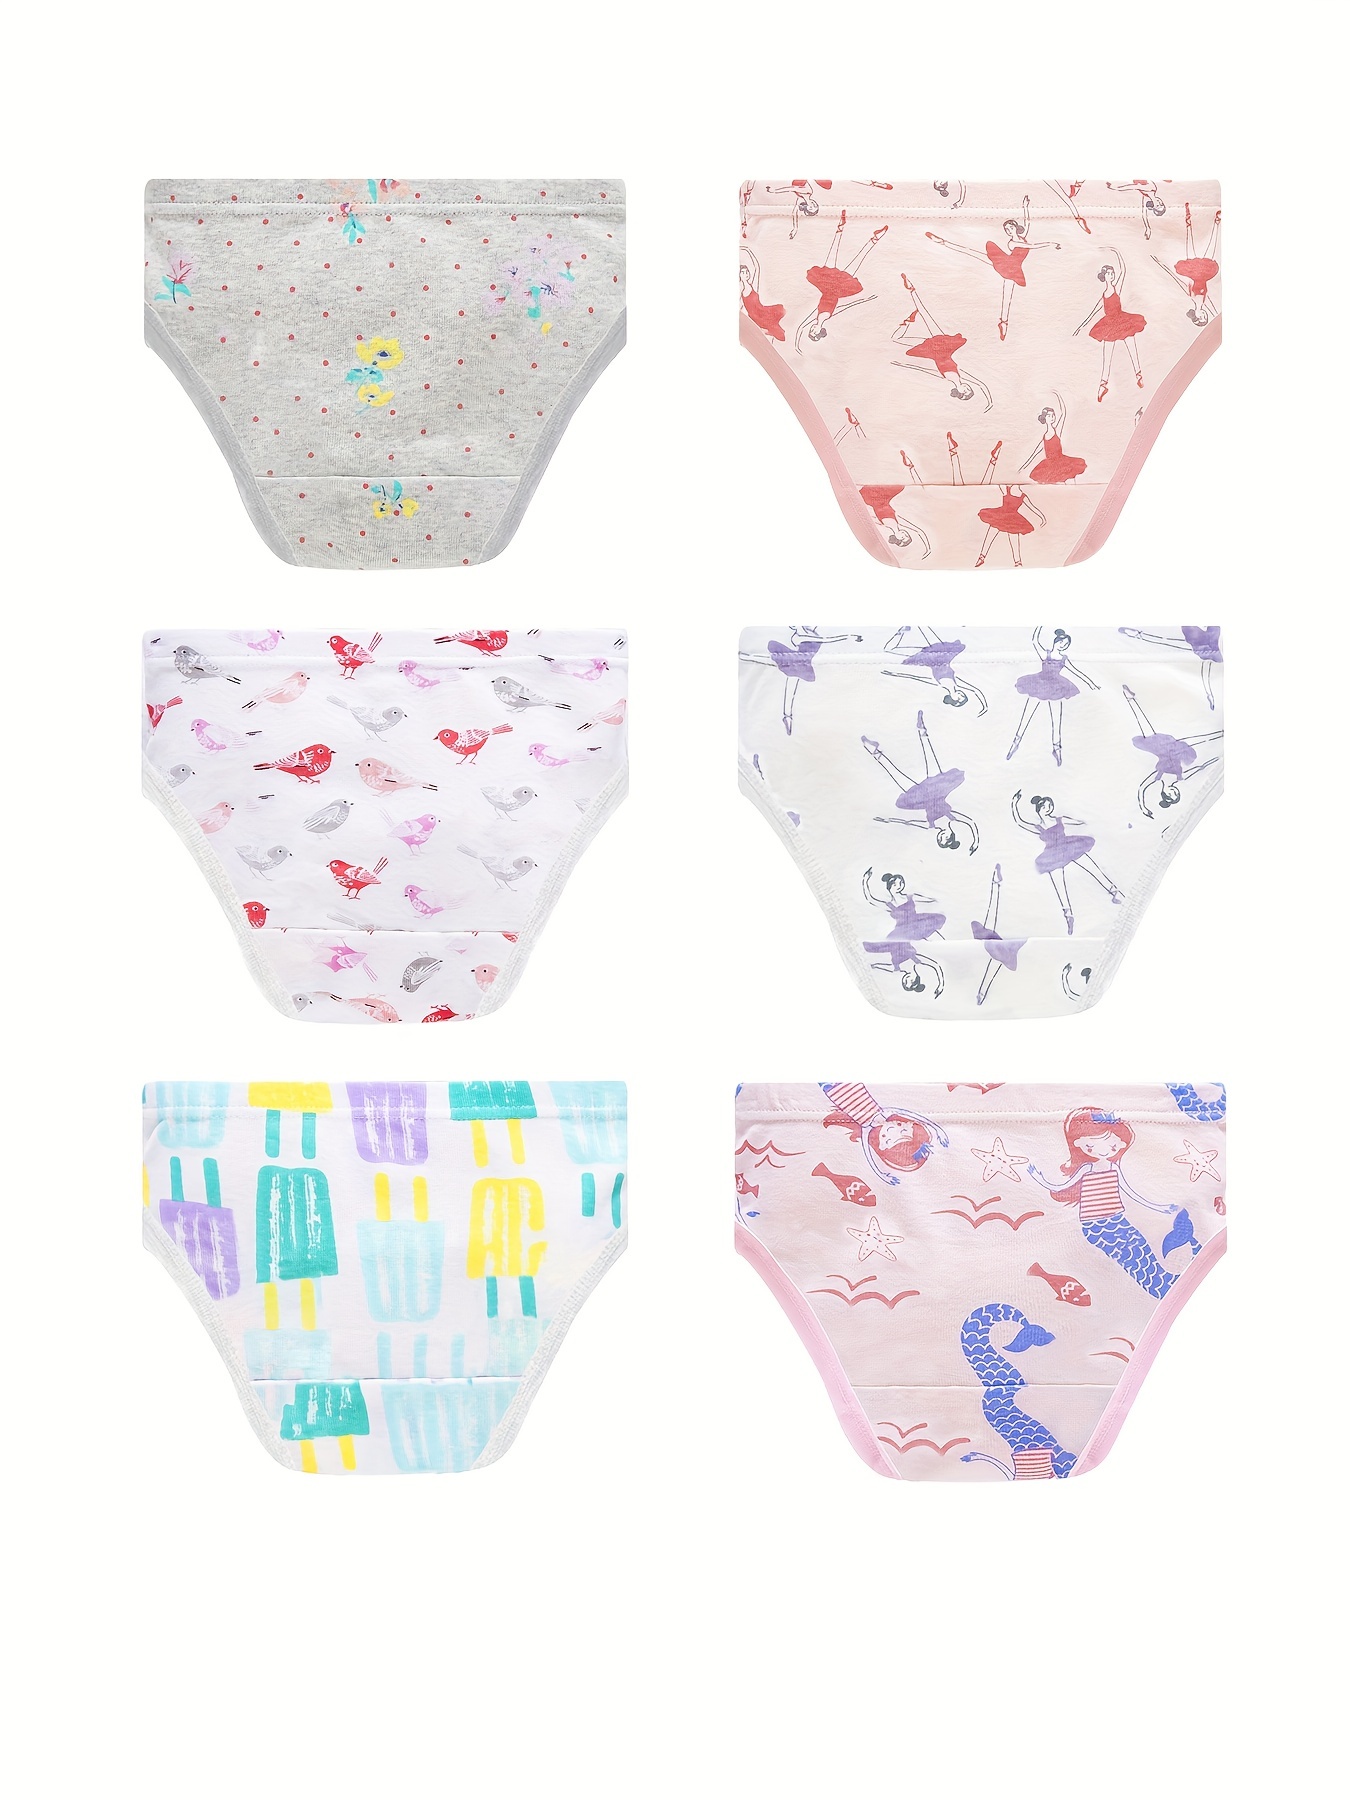  Girls' Underwear - 14 / Big Girls (7-16) / Girls' Underwear /  Girls' Clothing: Clothing, Shoes & Jewelry